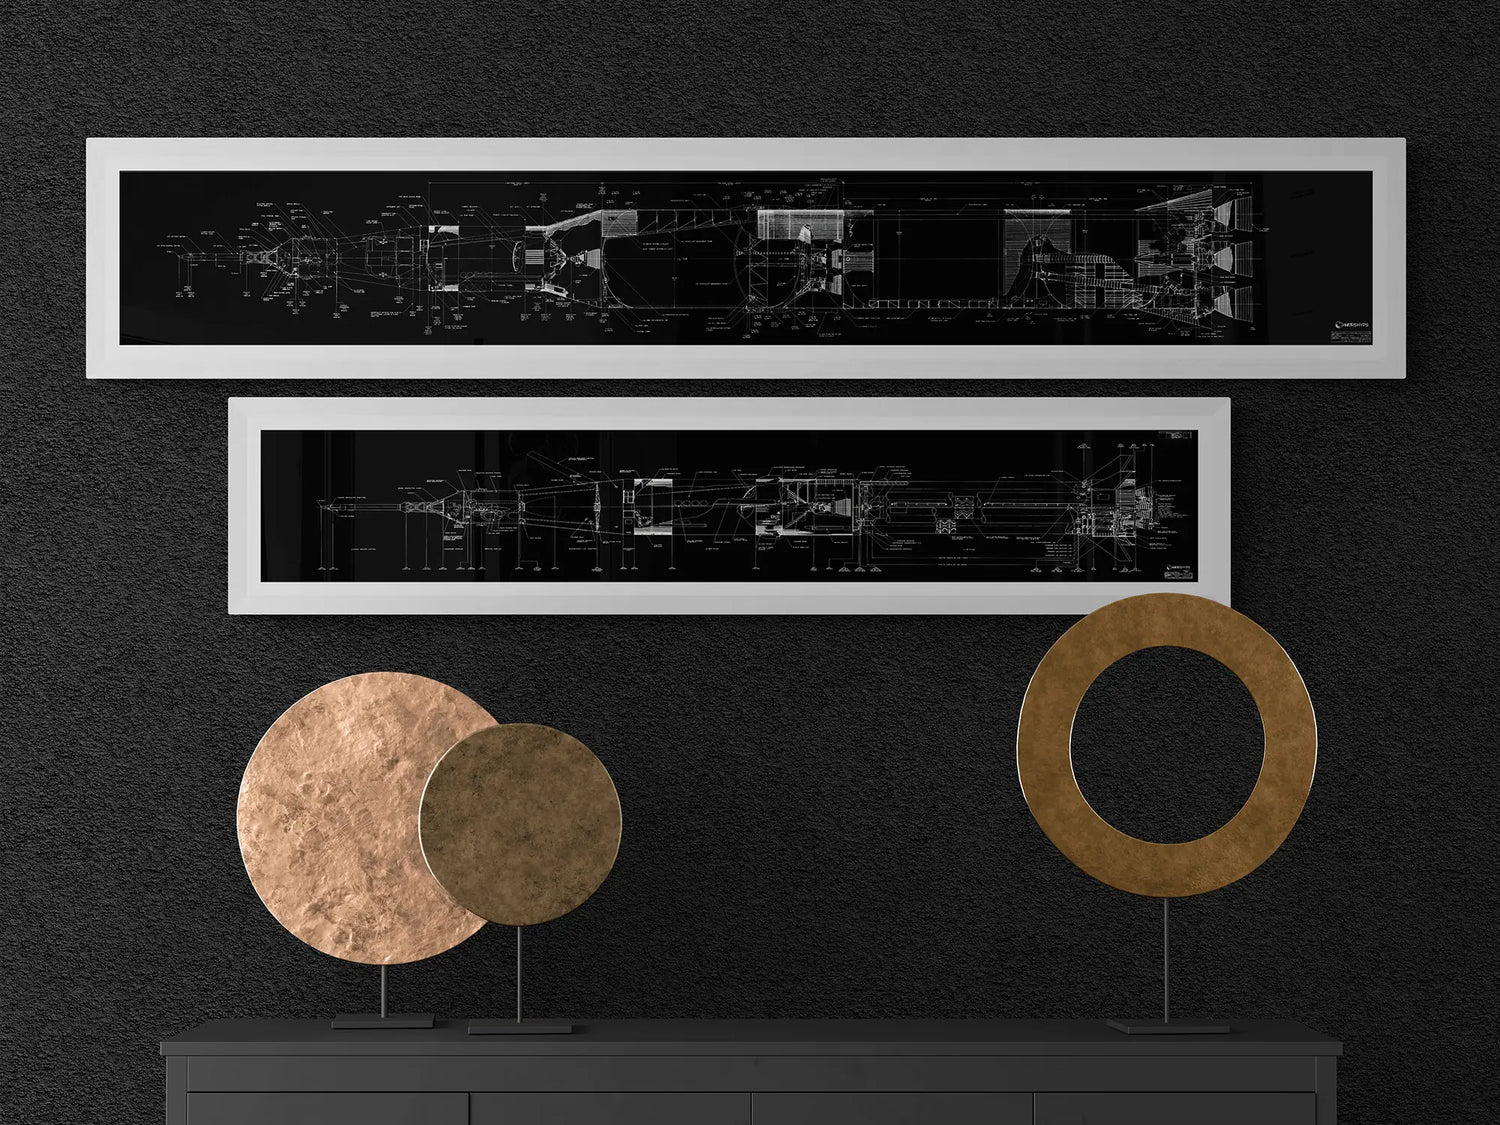 Apollo Saturn Blueprint | NASA posters | Two black-framed Apollo Saturn rocket blueprints, one larger and one smaller, are displayed on a dark wall. The detailed white schematics contrast with the black background. Below, a dark dresser with two circular metallic sculptures, one bronze and one gold, adds a touch of elegance.